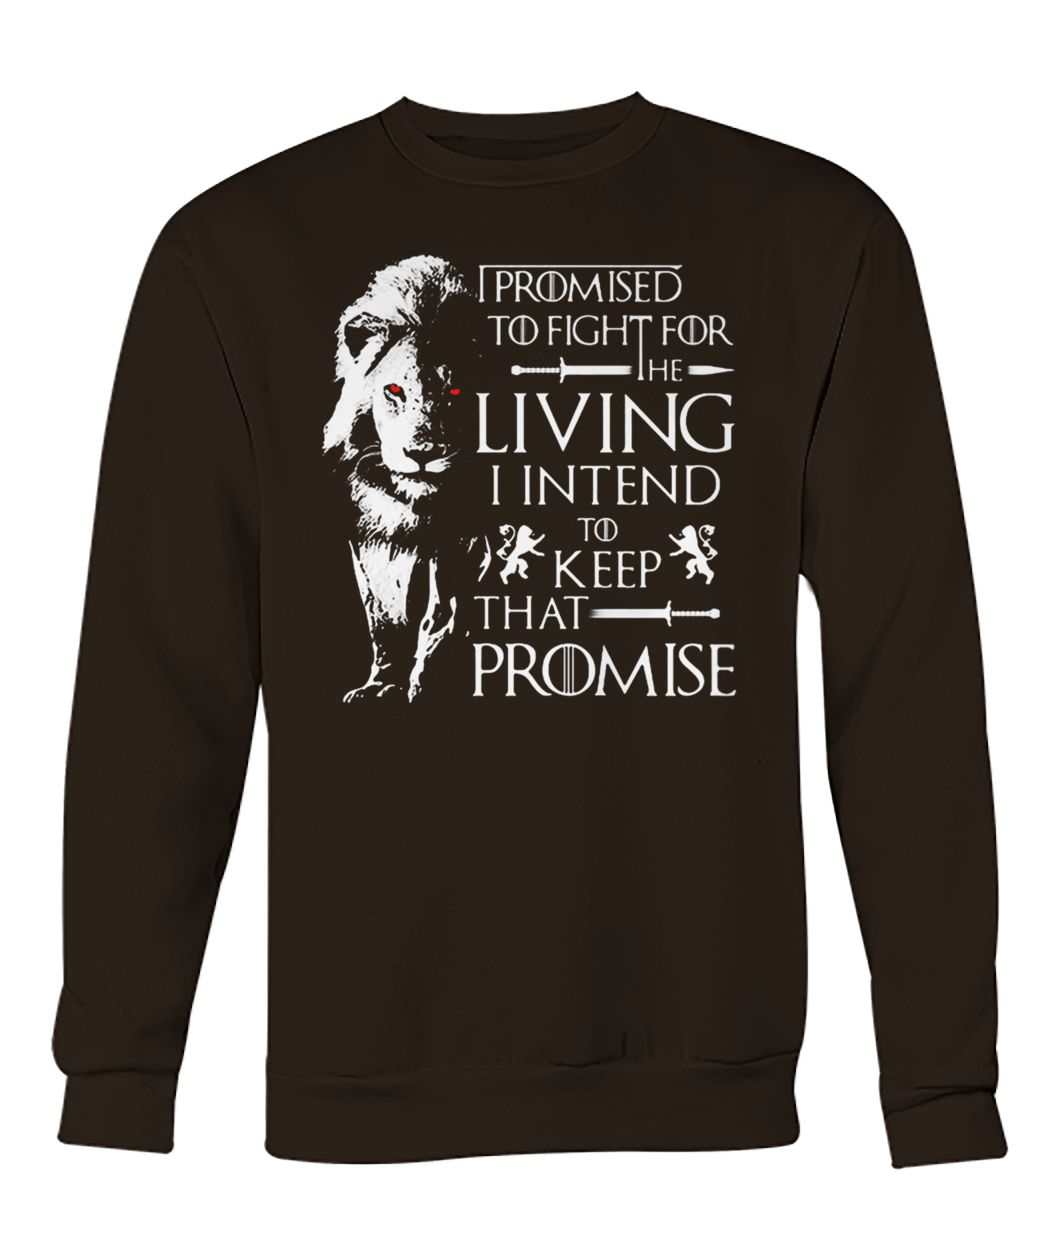 Game of thrones jaime lannister lion I promised to fight for the living I intend to keep that promise crew neck sweatshirt